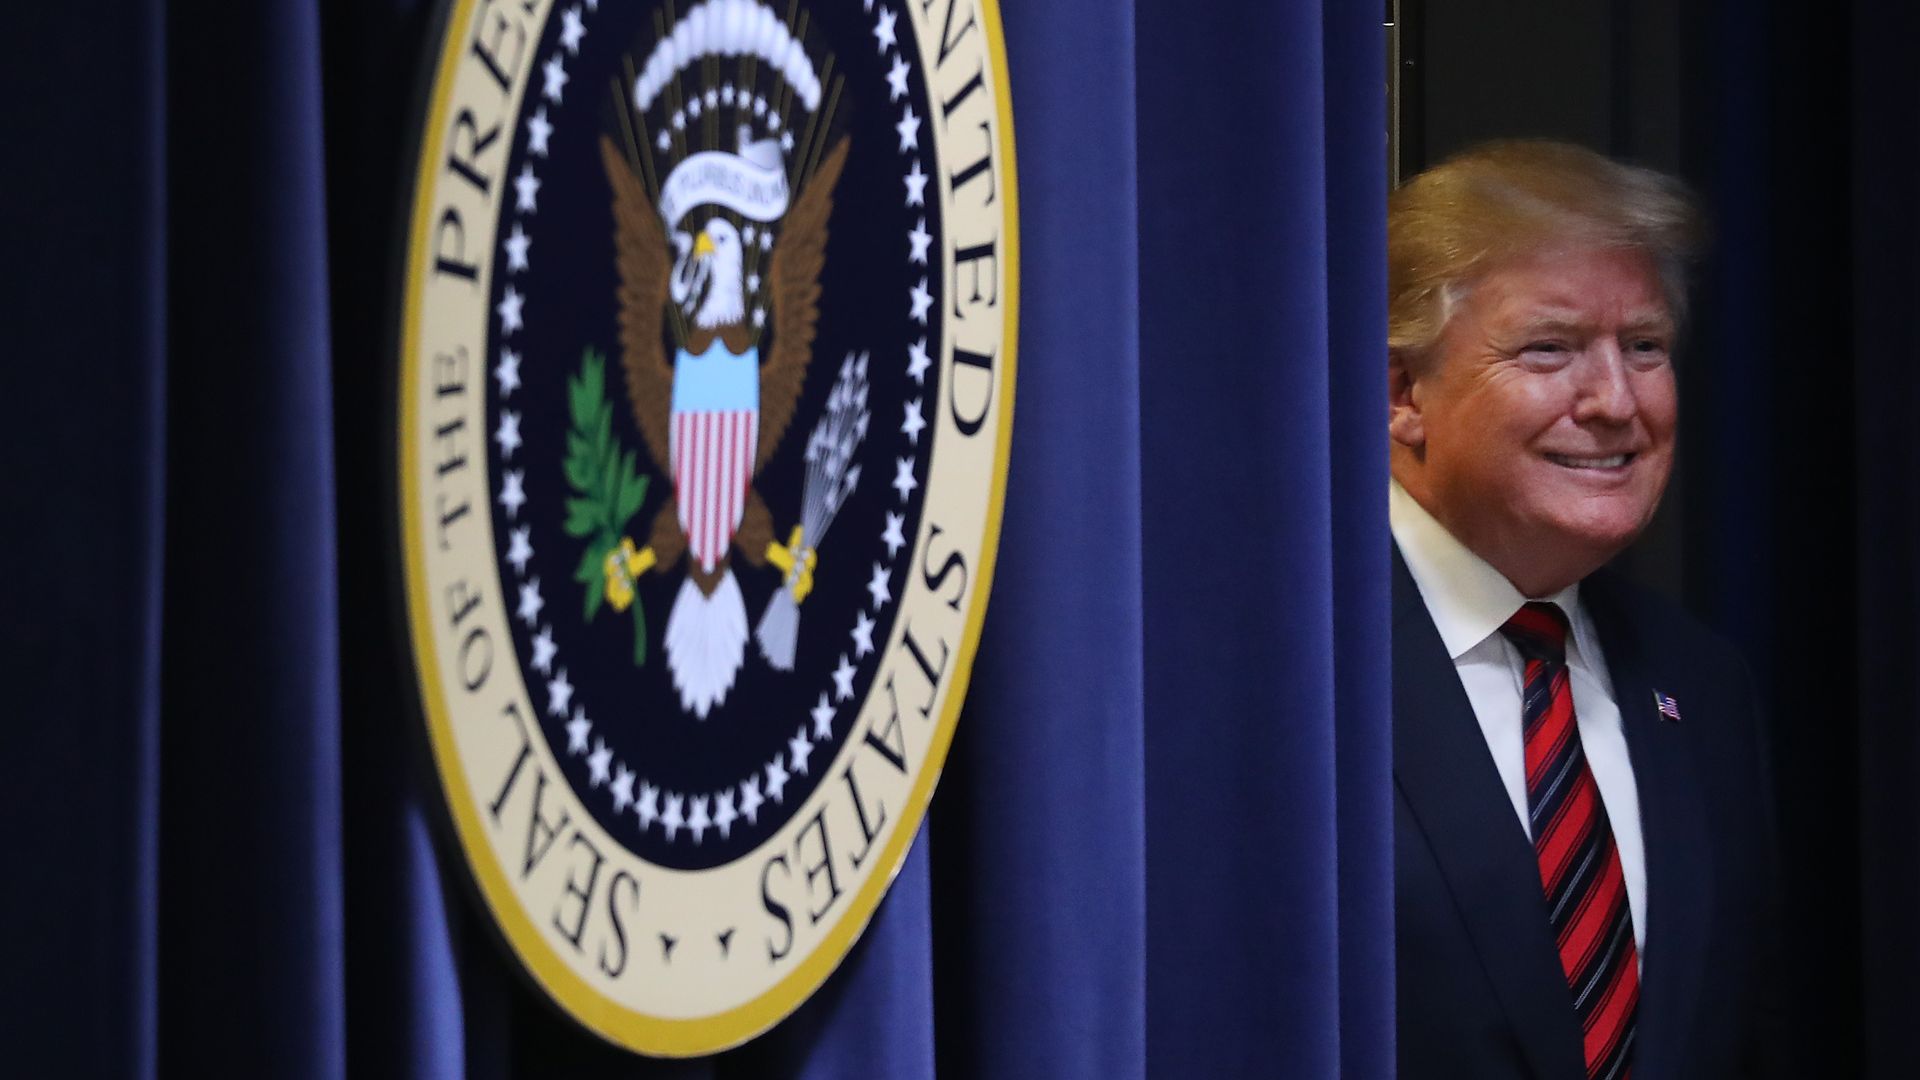 In this image, Trump smiles next to a heavy blue curtain next to the presidential seal. 